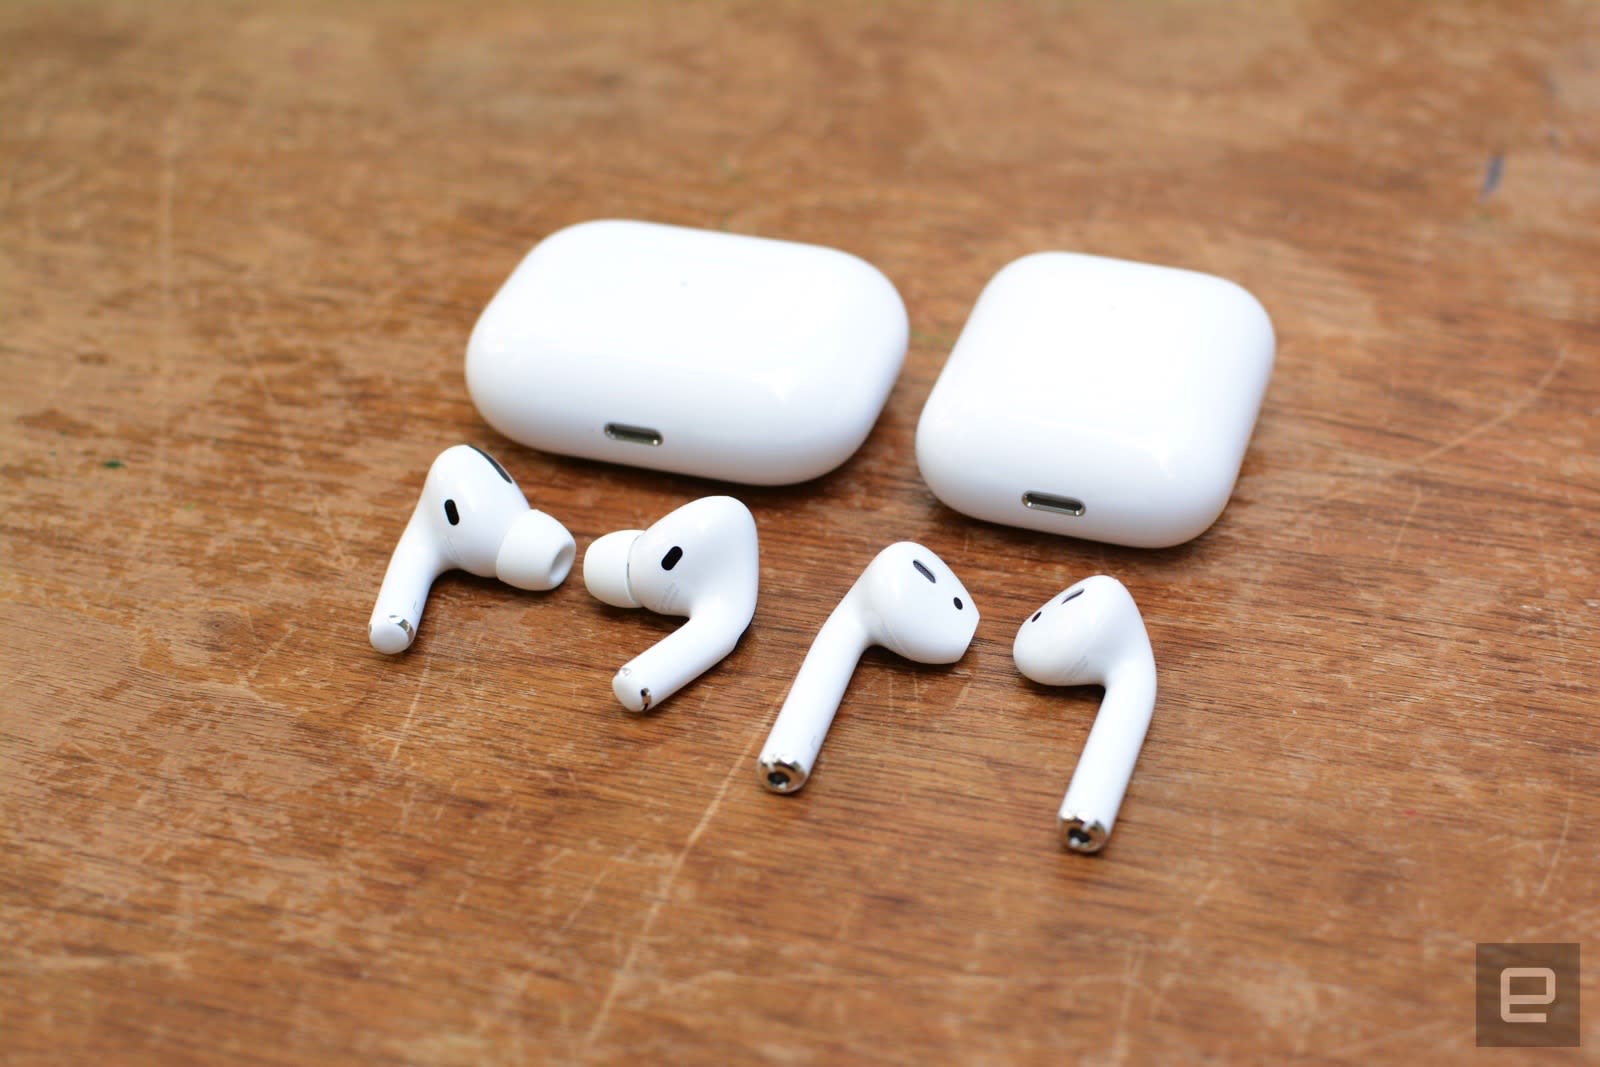 AirPods Pro review: Apple's latest earbuds can hang with the best 